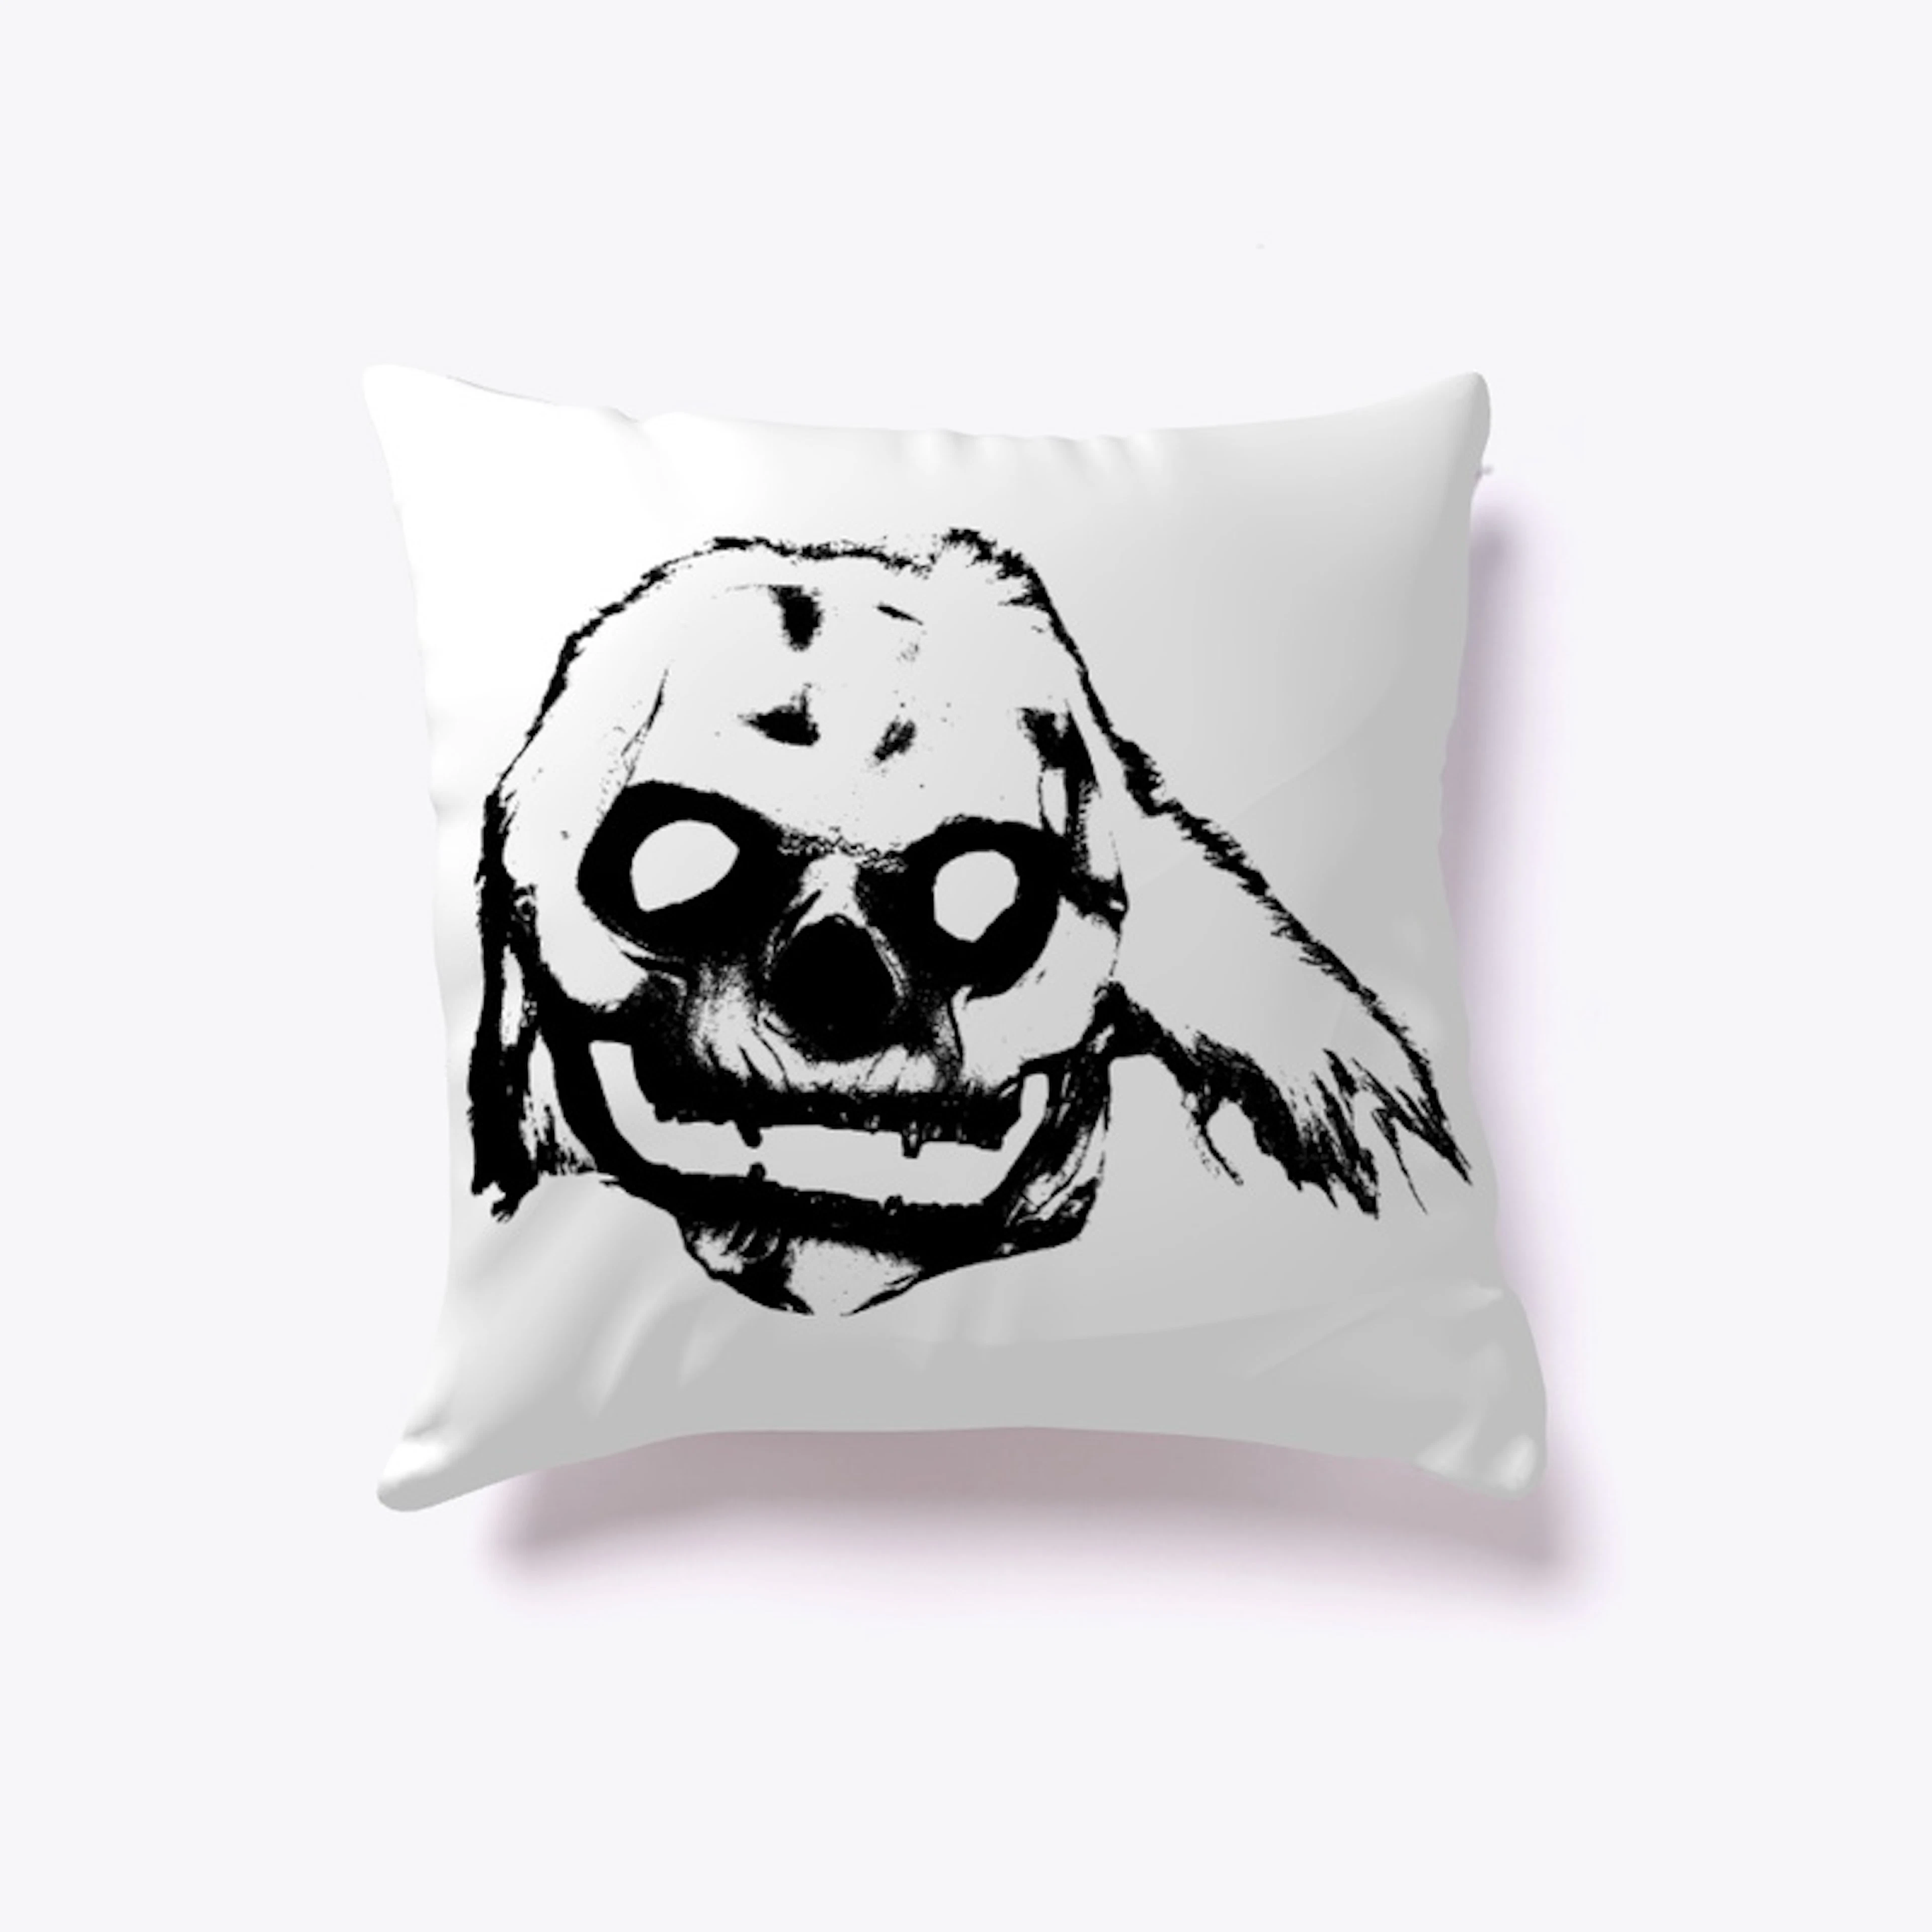 Jumpscare Mask Pillow White